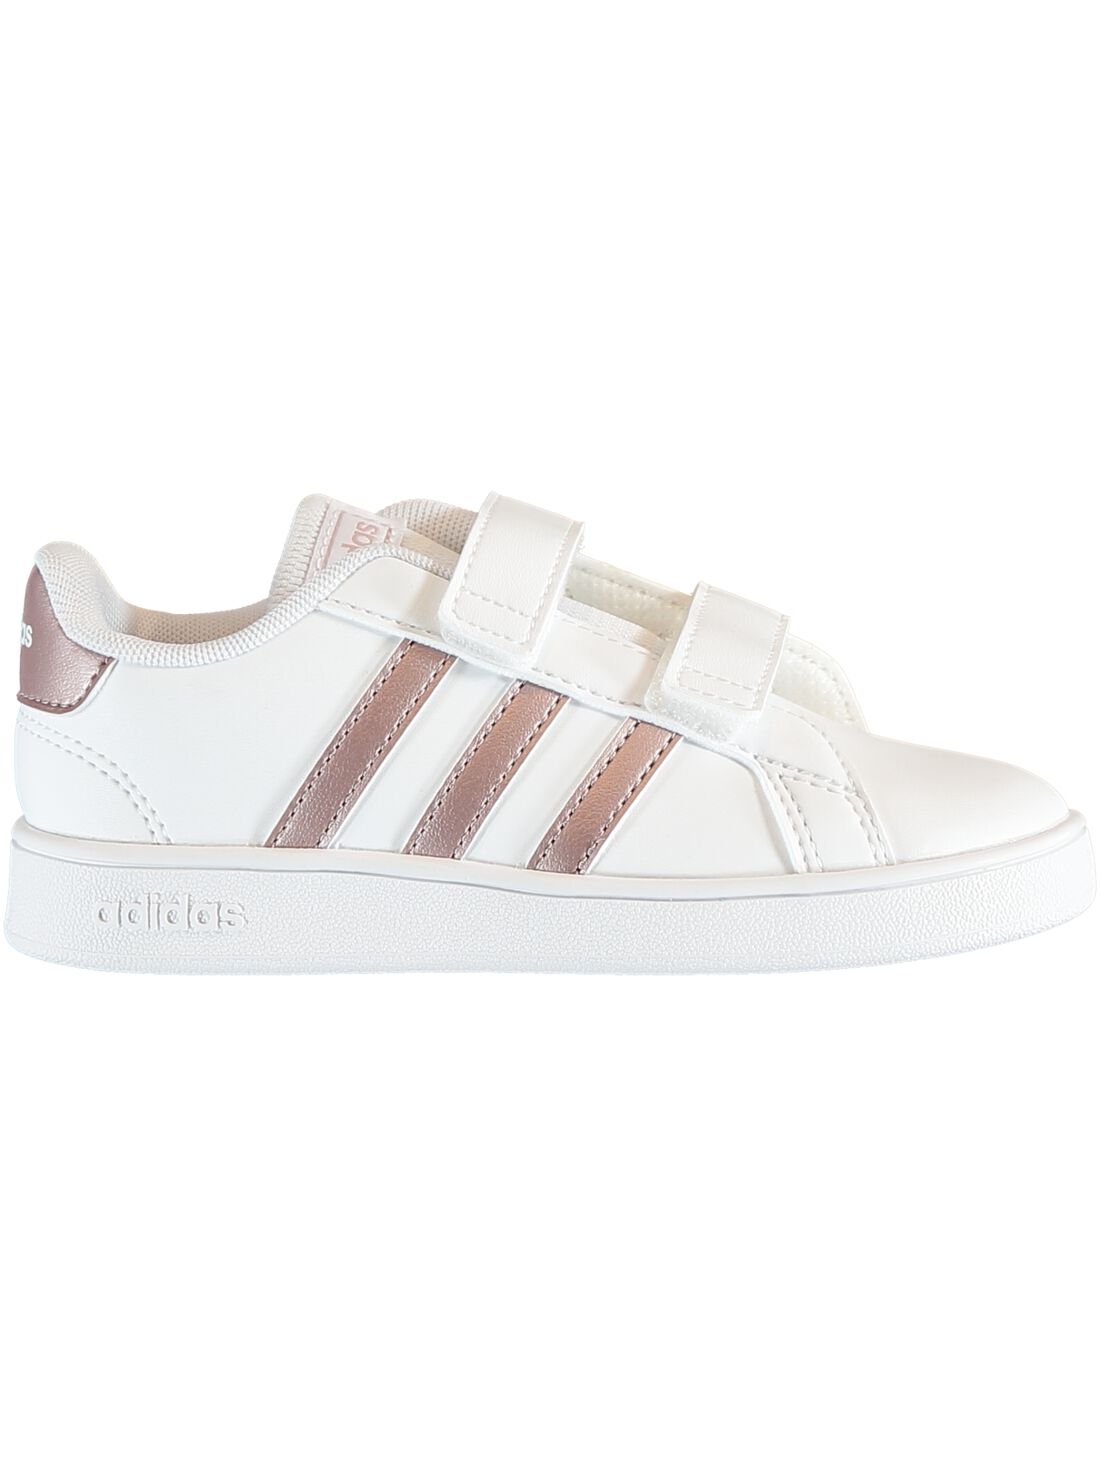 adidas blanche fille